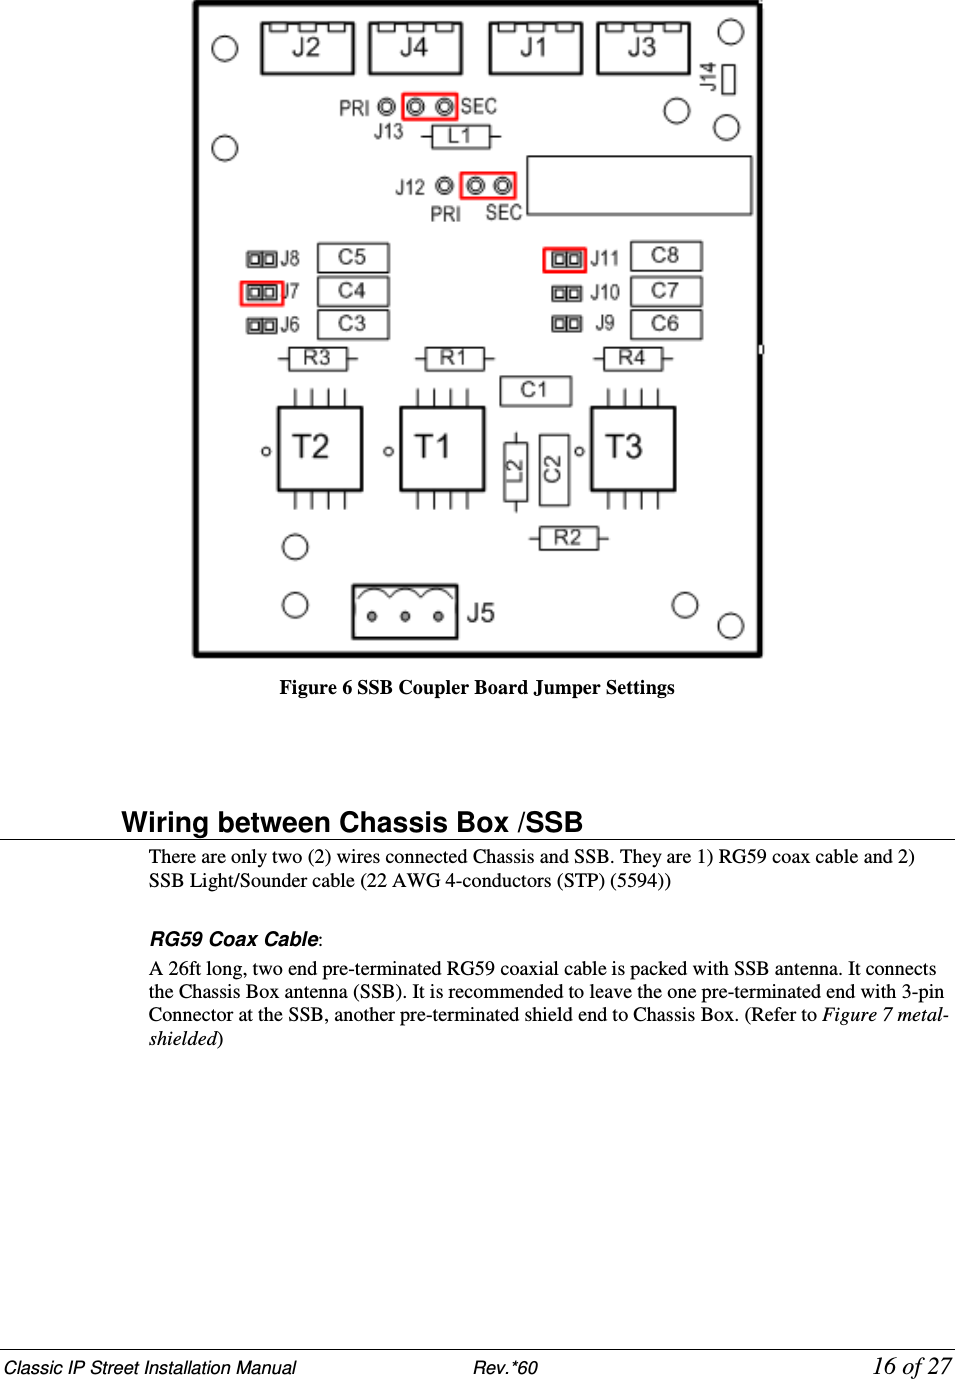 Classic IP Street Installation Manual                           Rev.*60            16 of 27  Figure 6 SSB Coupler Board Jumper Settings                   Wiring between Chassis Box /SSB There are only two (2) wires connected Chassis and SSB. They are 1) RG59 coax cable and 2) SSB Light/Sounder cable (22 AWG 4-conductors (STP) (5594))  RG59 Coax Cable:  A 26ft long, two end pre-terminated RG59 coaxial cable is packed with SSB antenna. It connects the Chassis Box antenna (SSB). It is recommended to leave the one pre-terminated end with 3-pin Connector at the SSB, another pre-terminated shield end to Chassis Box. (Refer to Figure 7 metal-shielded) 